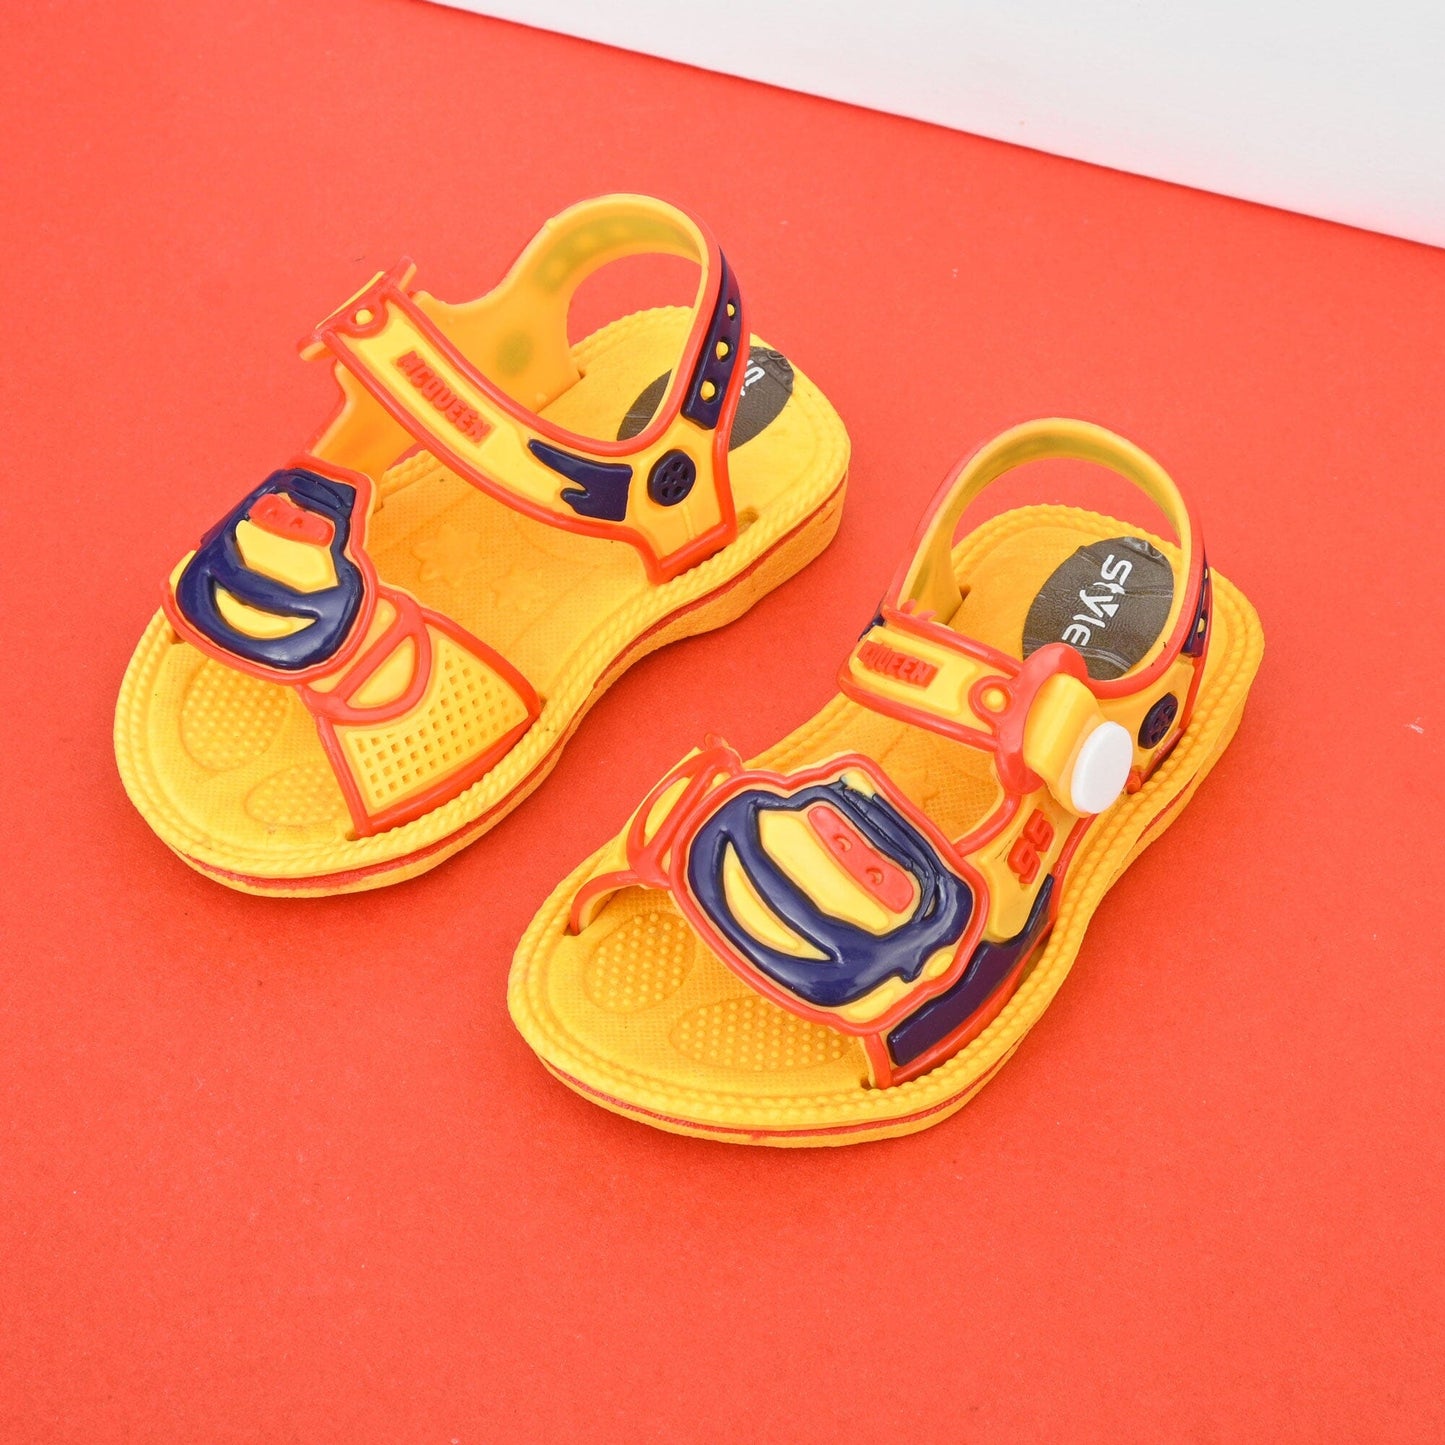 Kid's McQueen Car Themed Sandals Girl's Shoes RAM Yellow EUR 18 